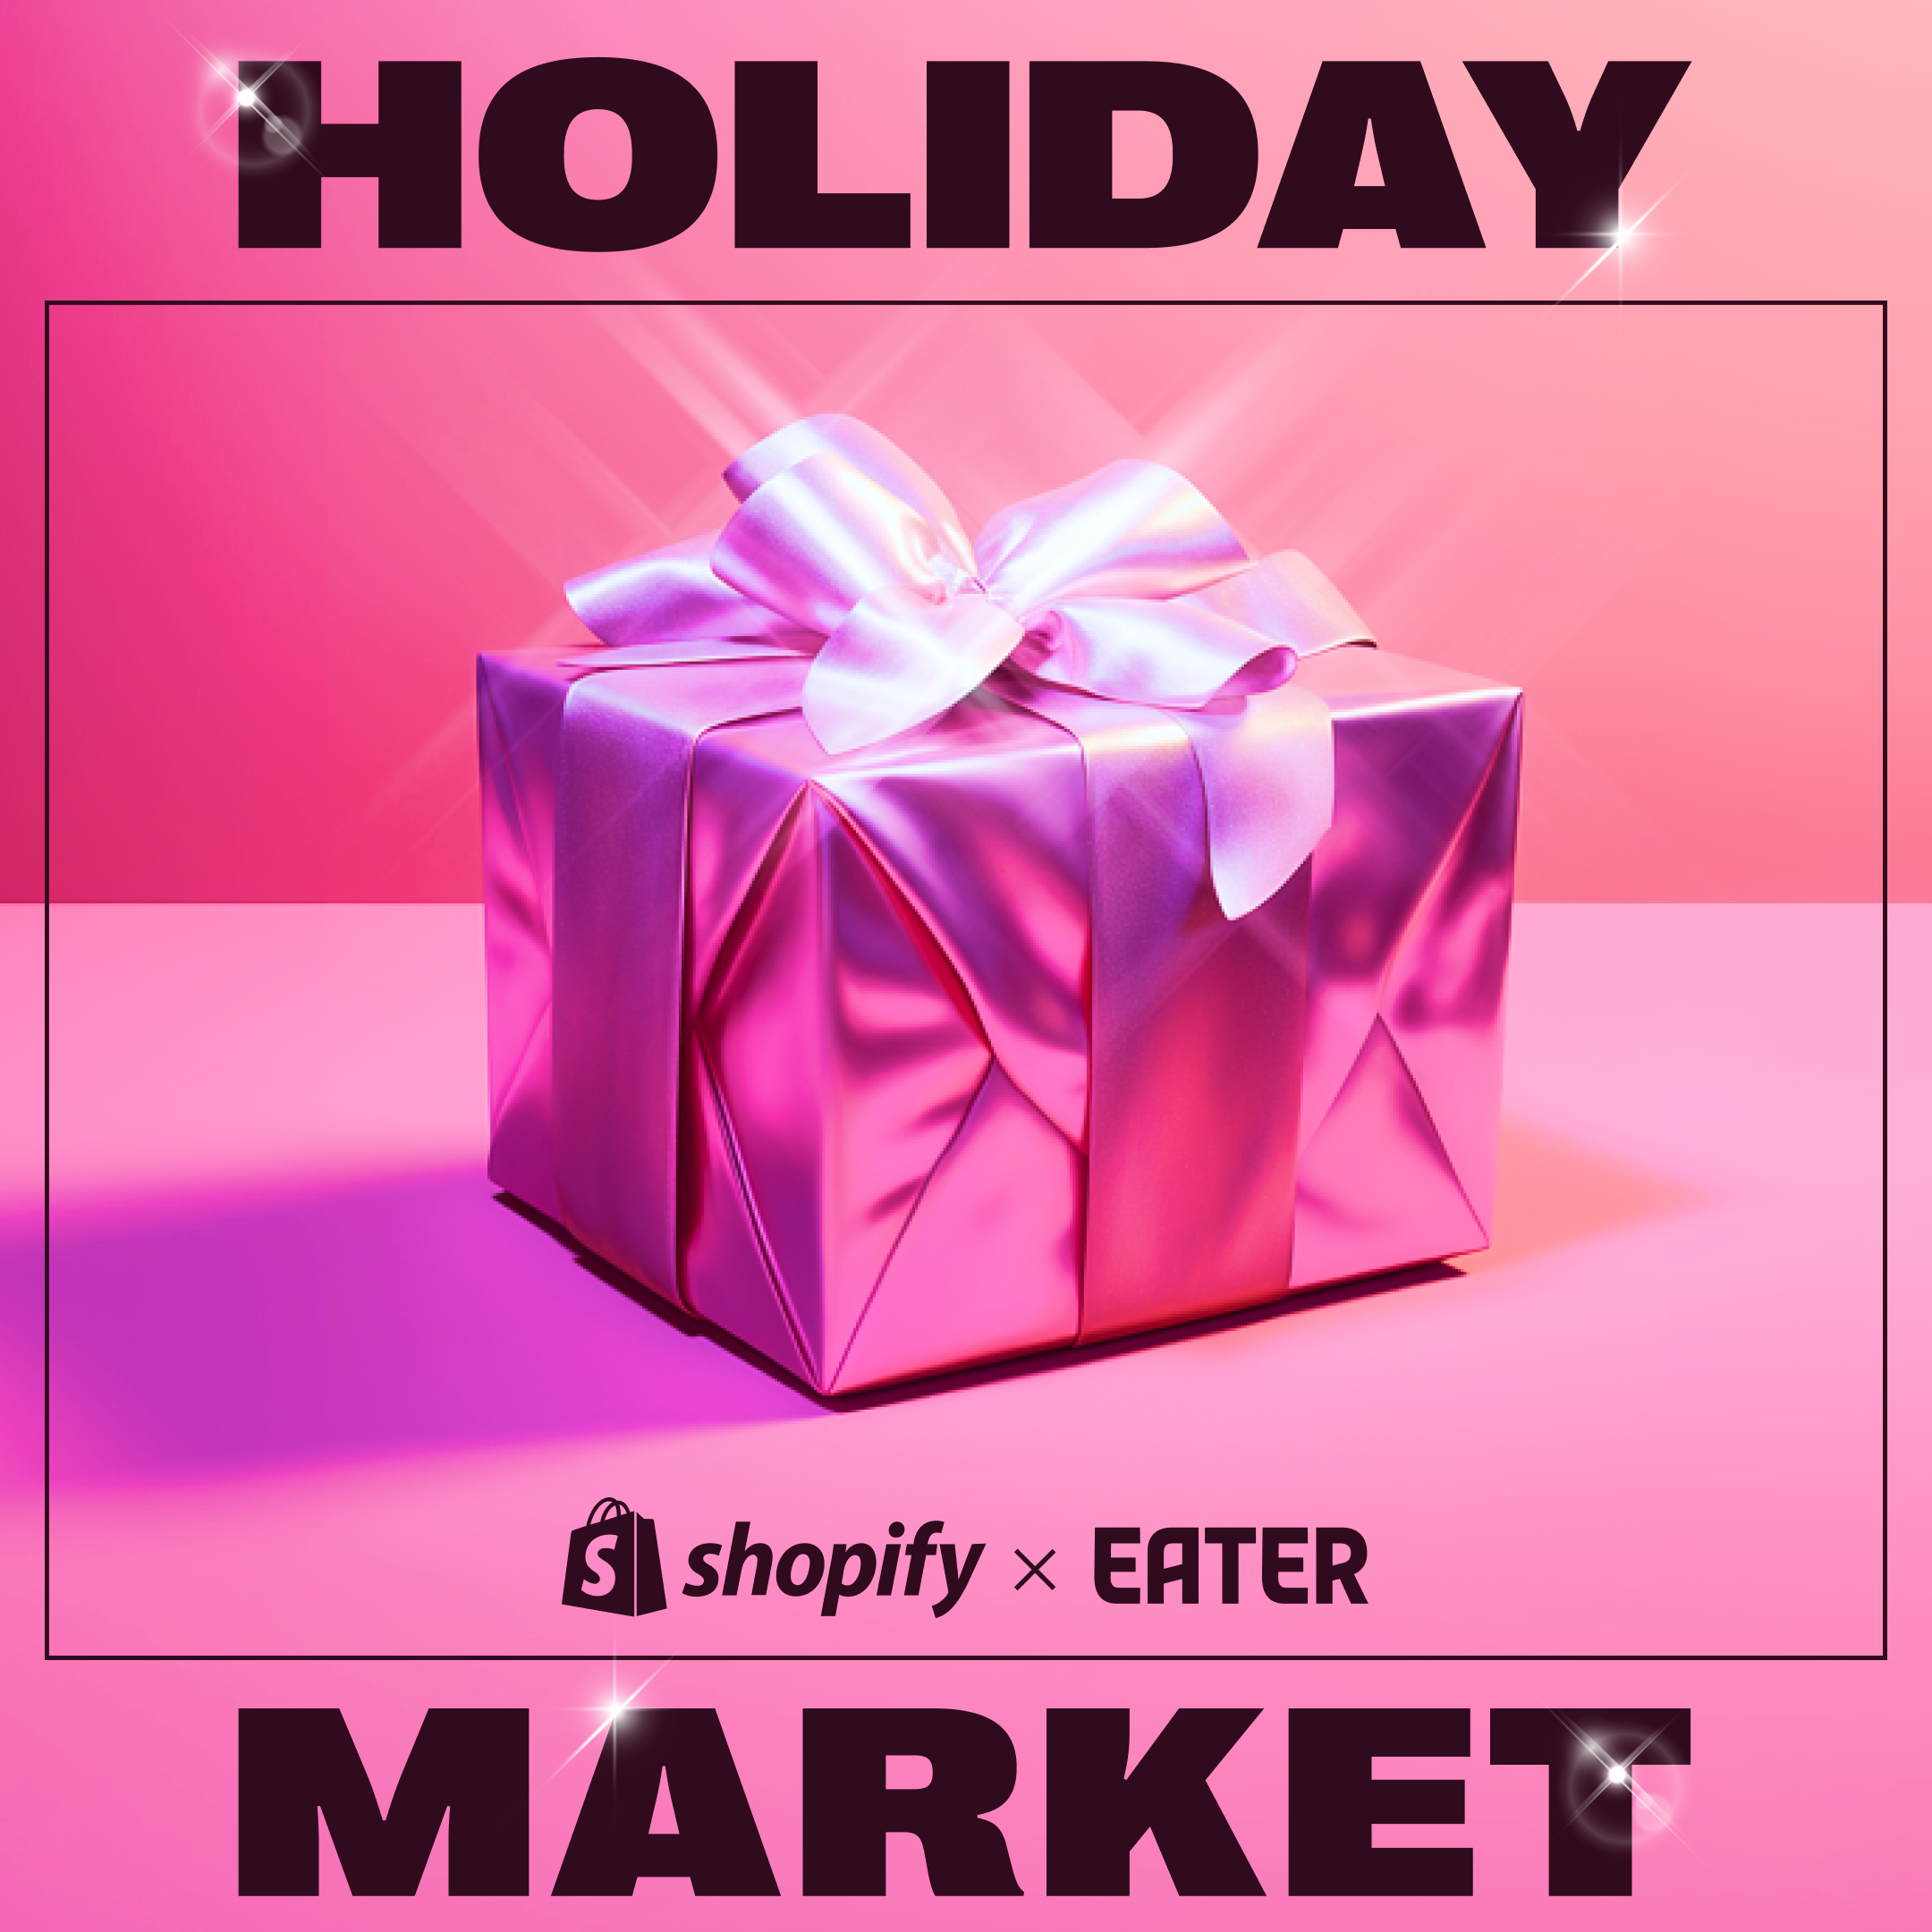 The words HOLIDAY MARKET with Shopify and Eater logos surrounds a photo of a metallic pink wrapped gift